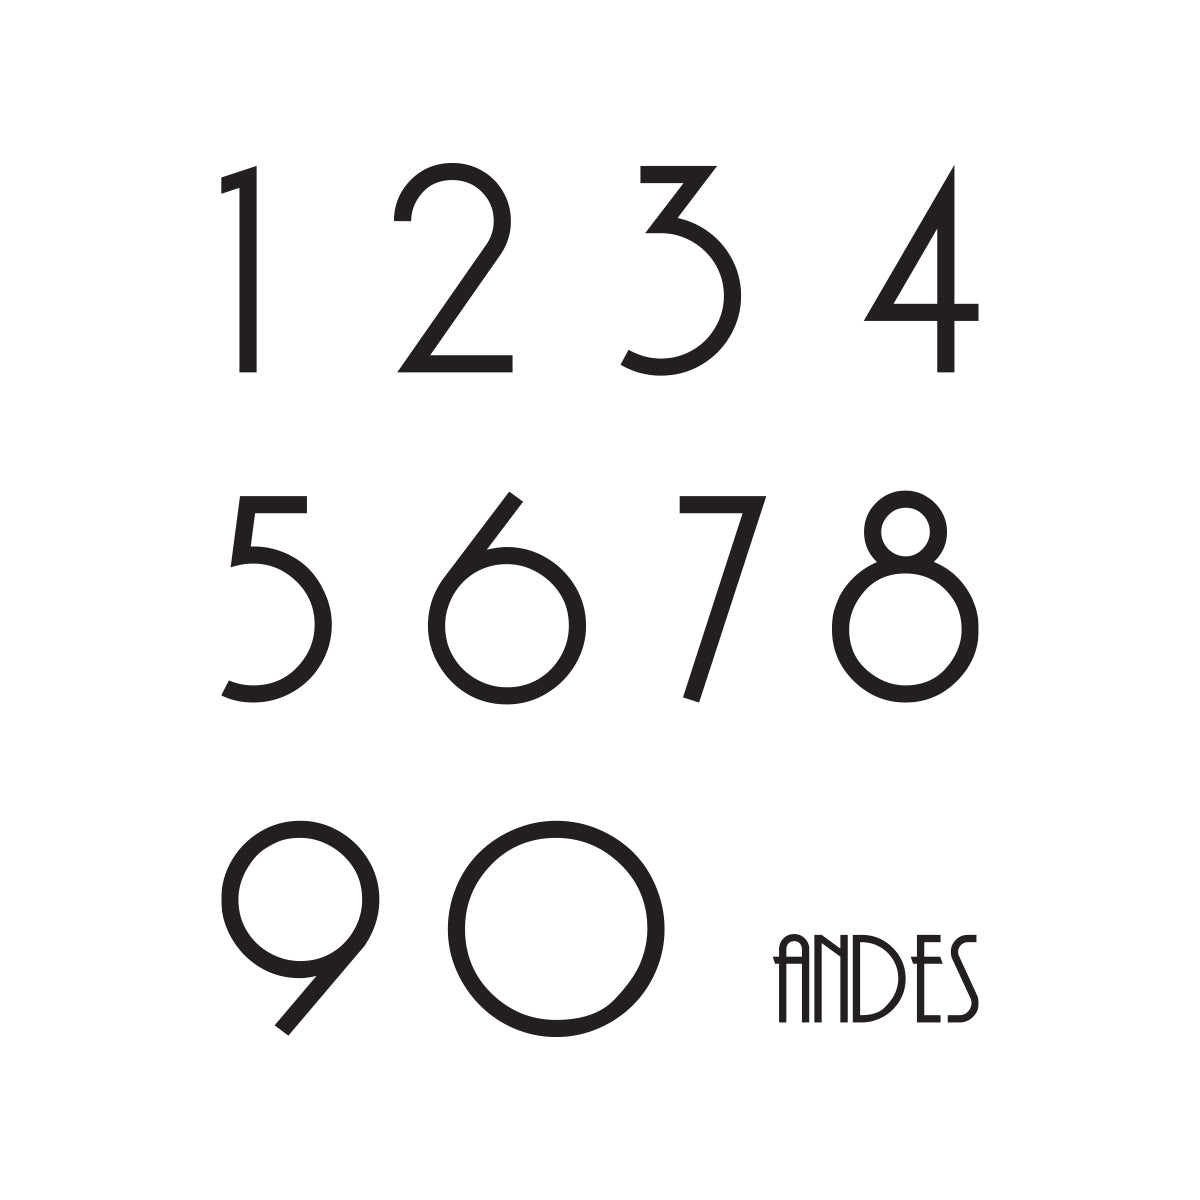 Andes Number in Circle.